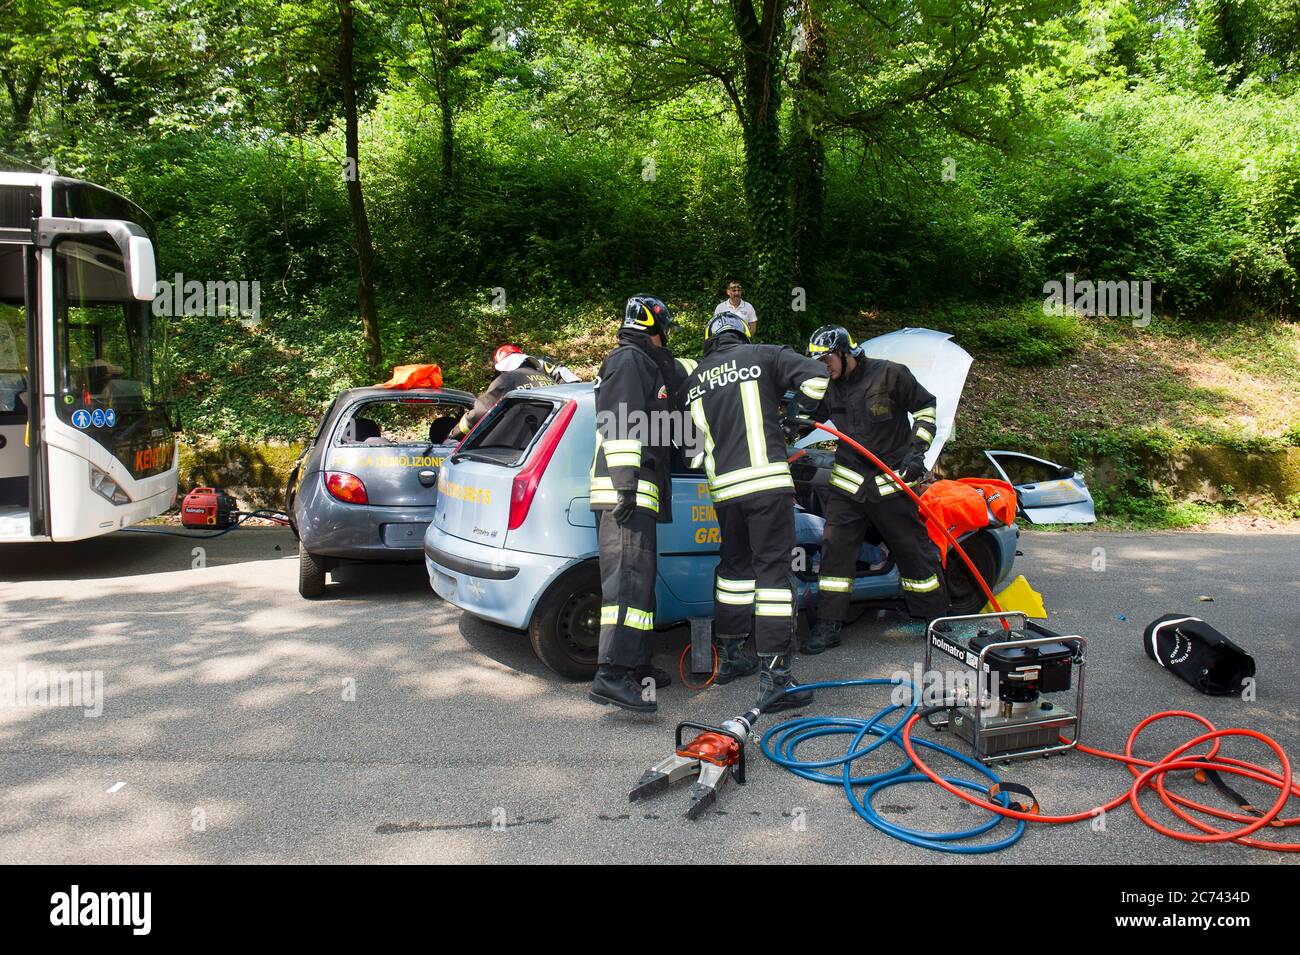 Europe, Italy, Lombardy, Monza. Emerlab Civil Defense Tutorial, Accident Simulation and Use of Equipment. Specifically, the sheet spreader and the hydraulic cutting-off machine to cut car parts and extract the injured person. Stock Photo